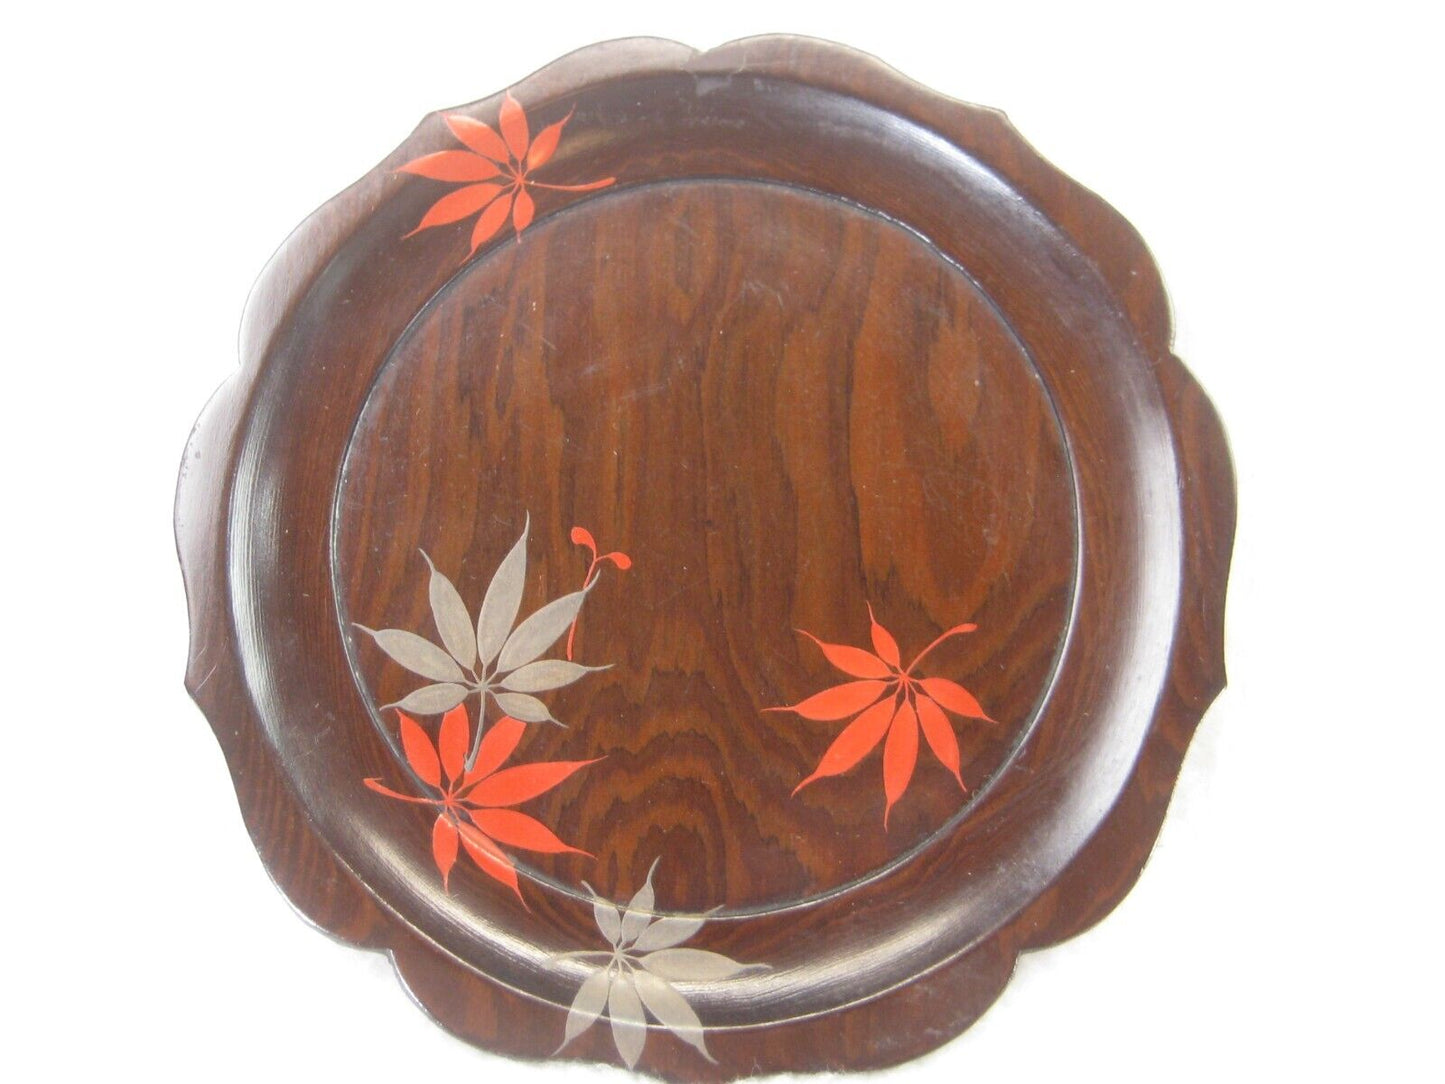 Antique Japanese Momo Lacquer Plate W/ Hand Painted Japanese Maple Leaves 6"